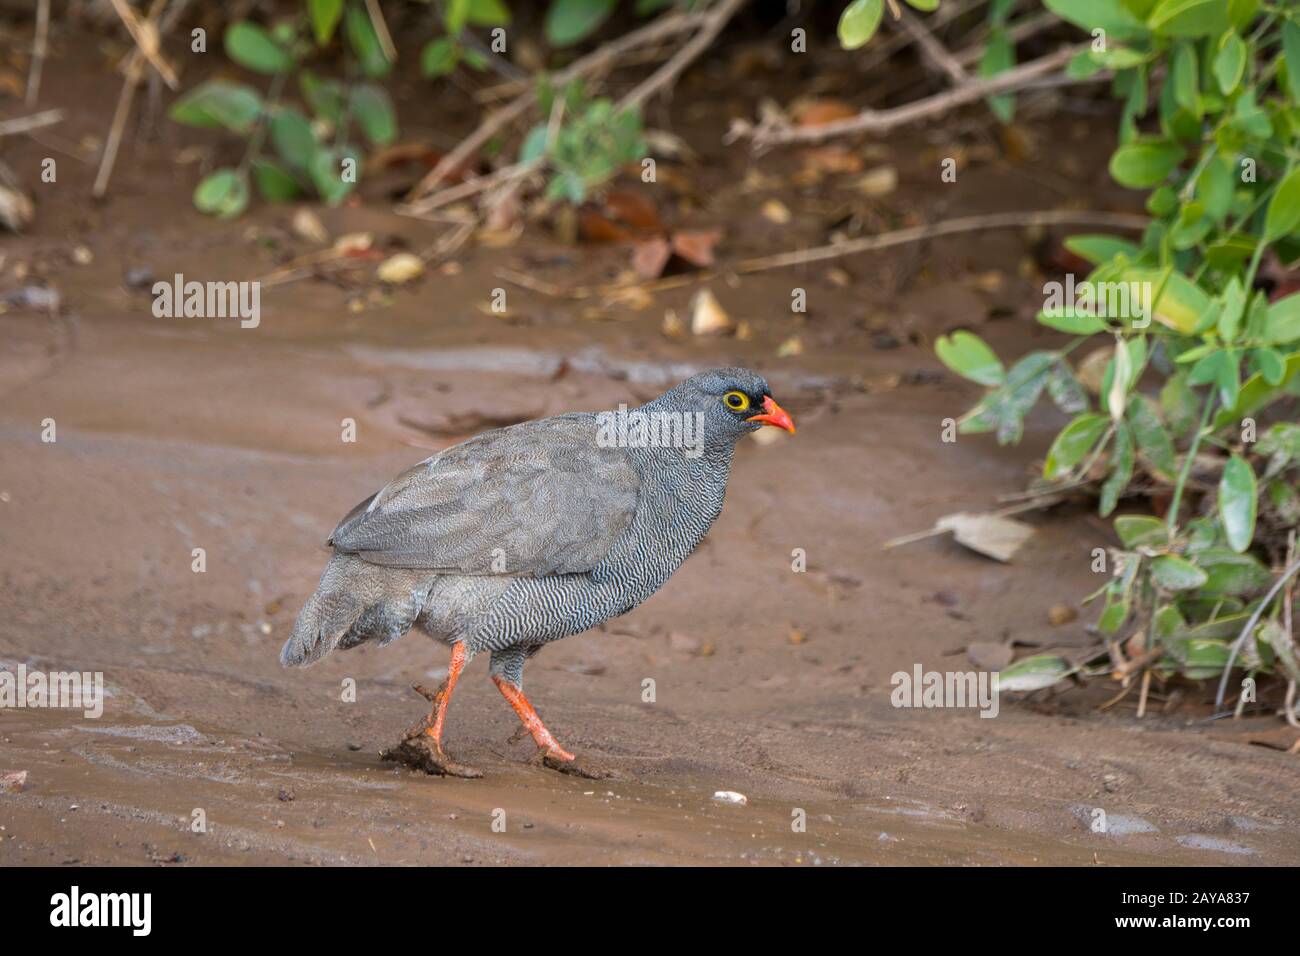 Red-billed spurfowl (Pternistis adspersus), also known as the red-billed francolin, in the Huanib River Valley in northern Damaraland/Kaokoland, Namib Stock Photo